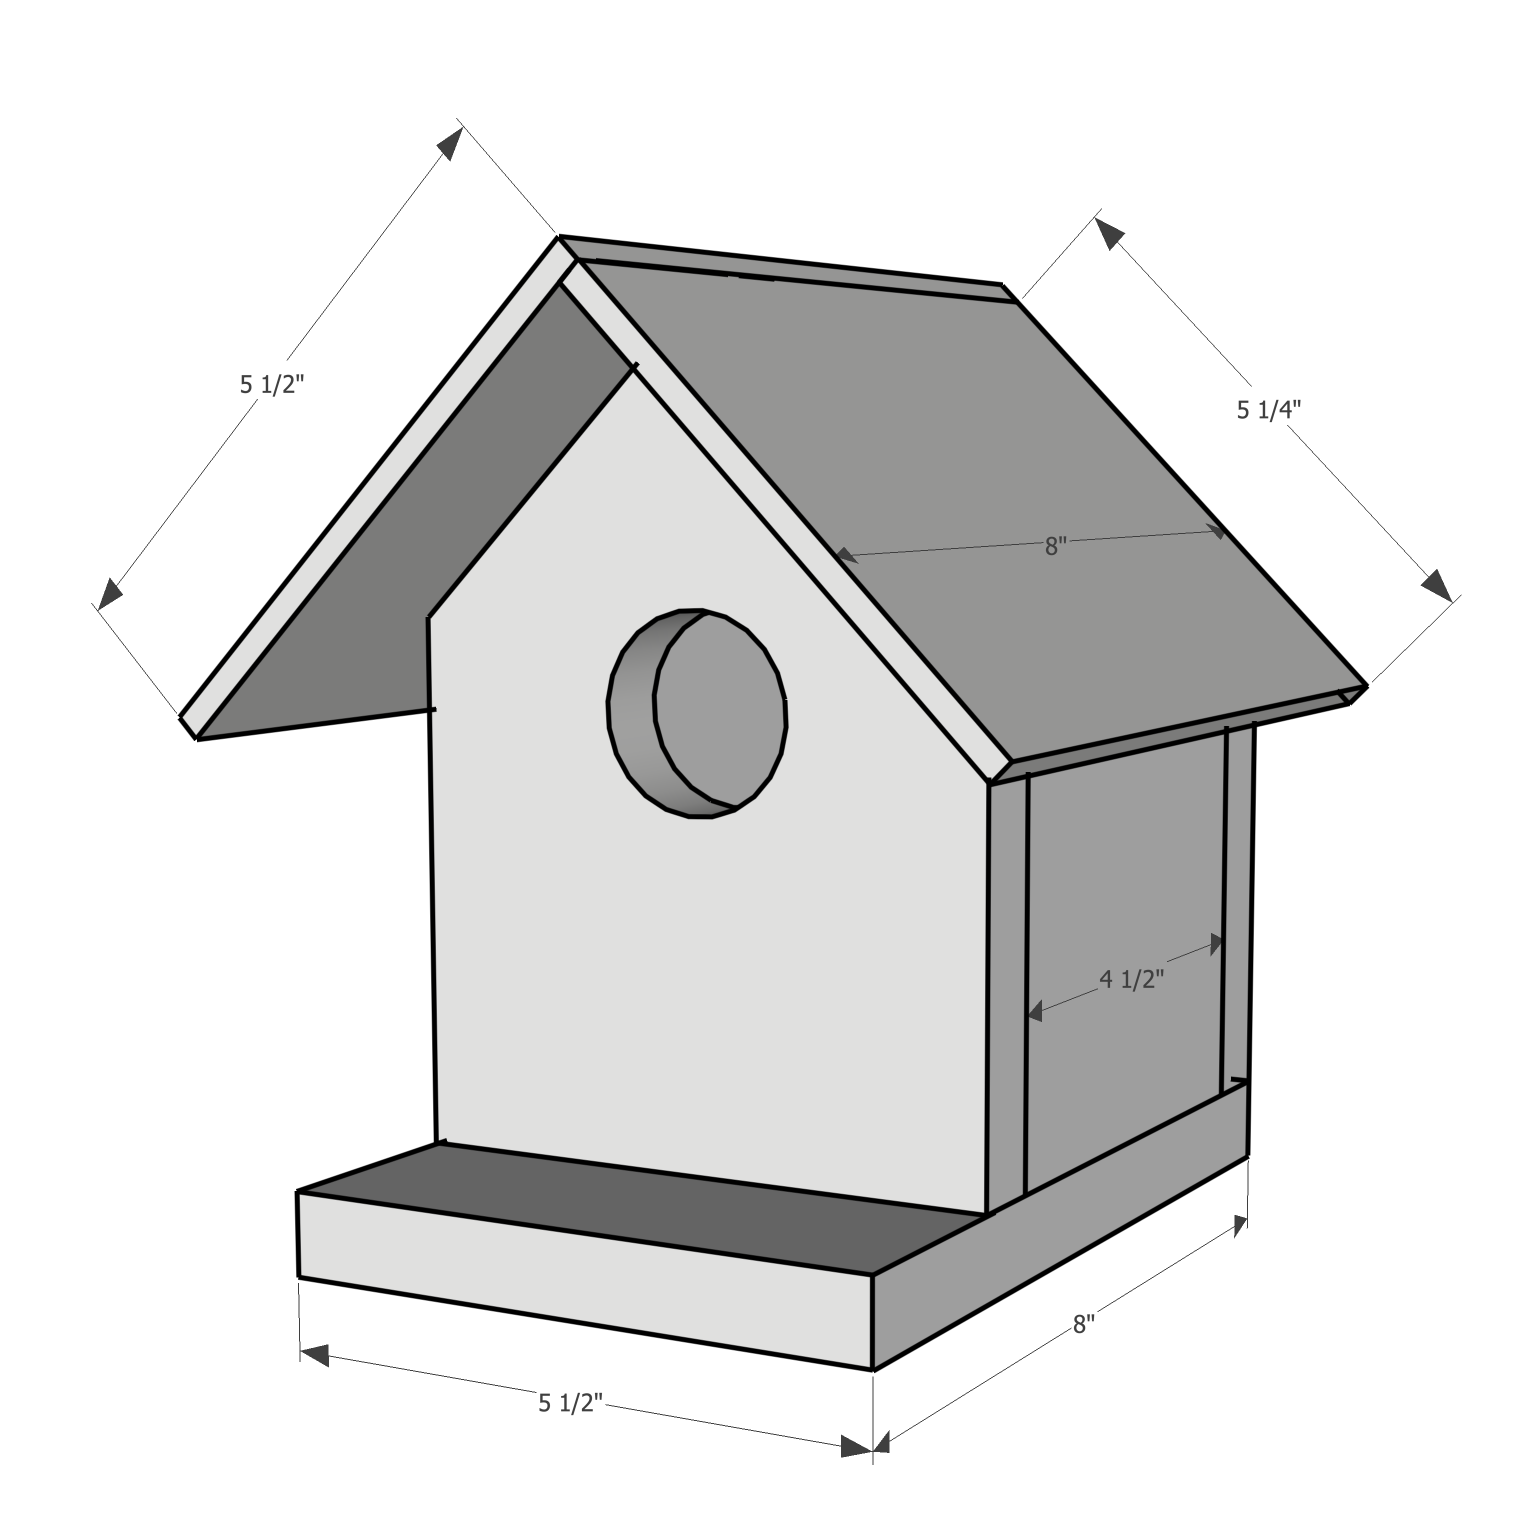 How to Build a Birdhouse This Old House